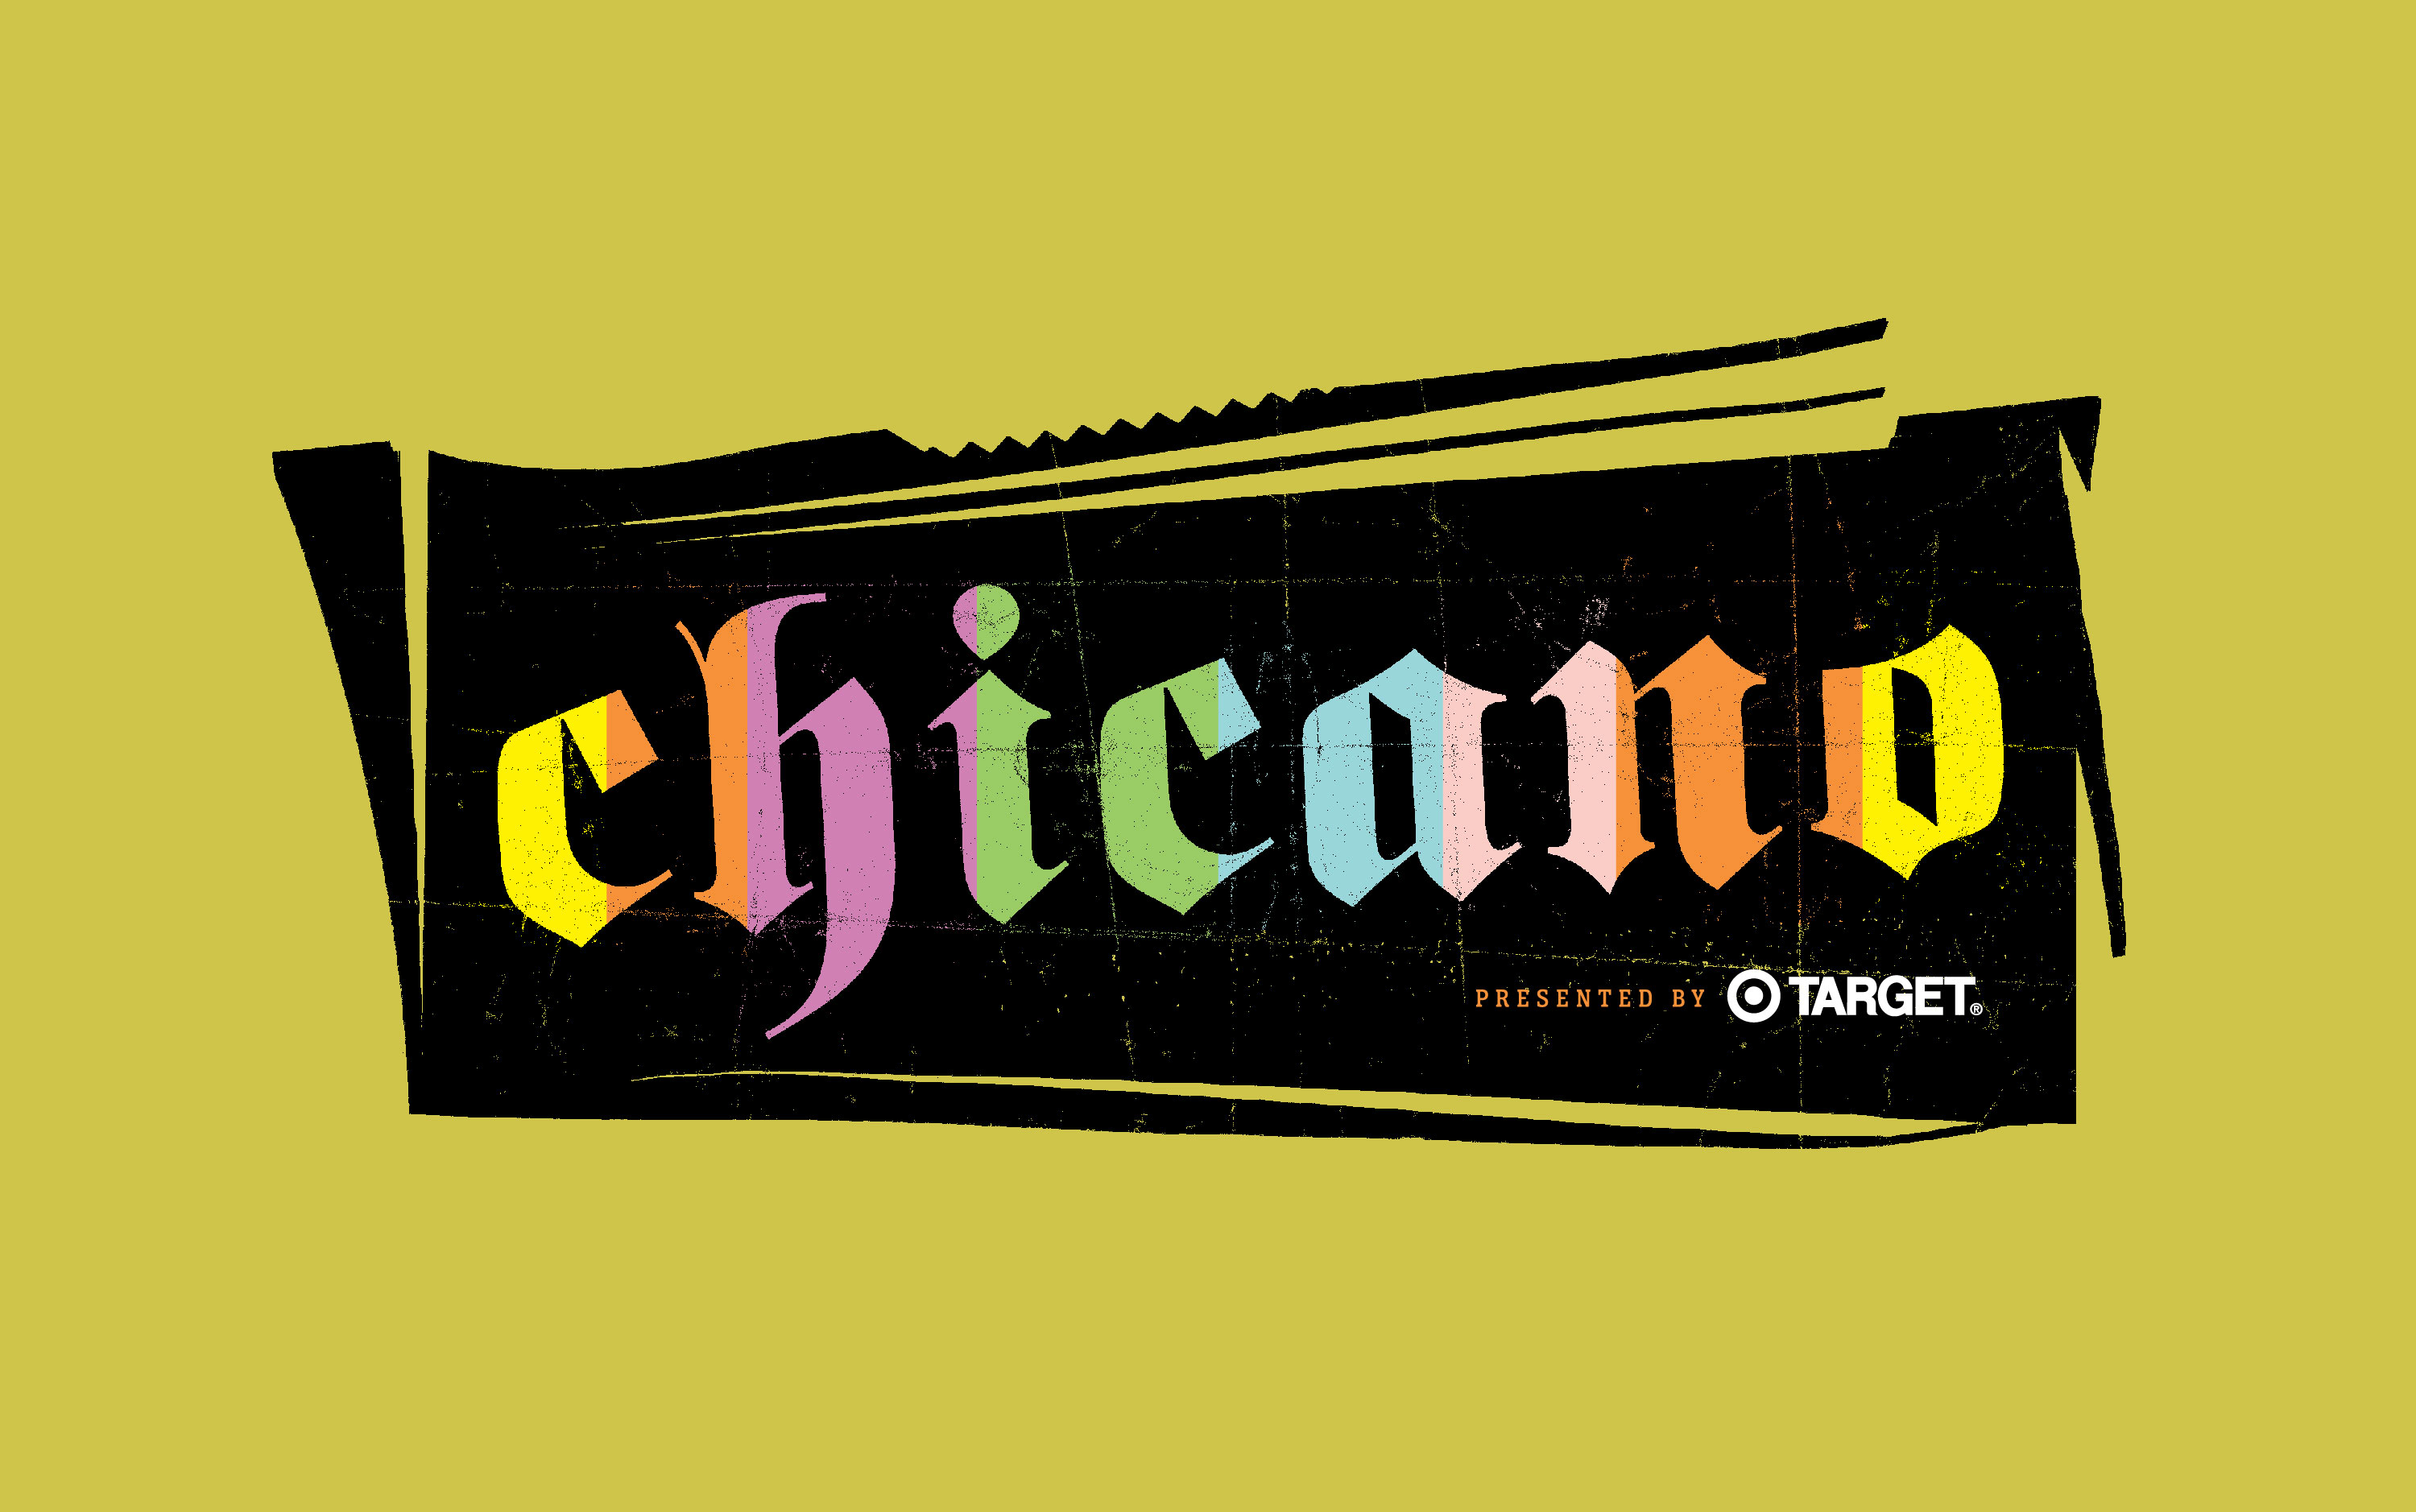 Cheech Marin's Chicano latin art tour presented by Target